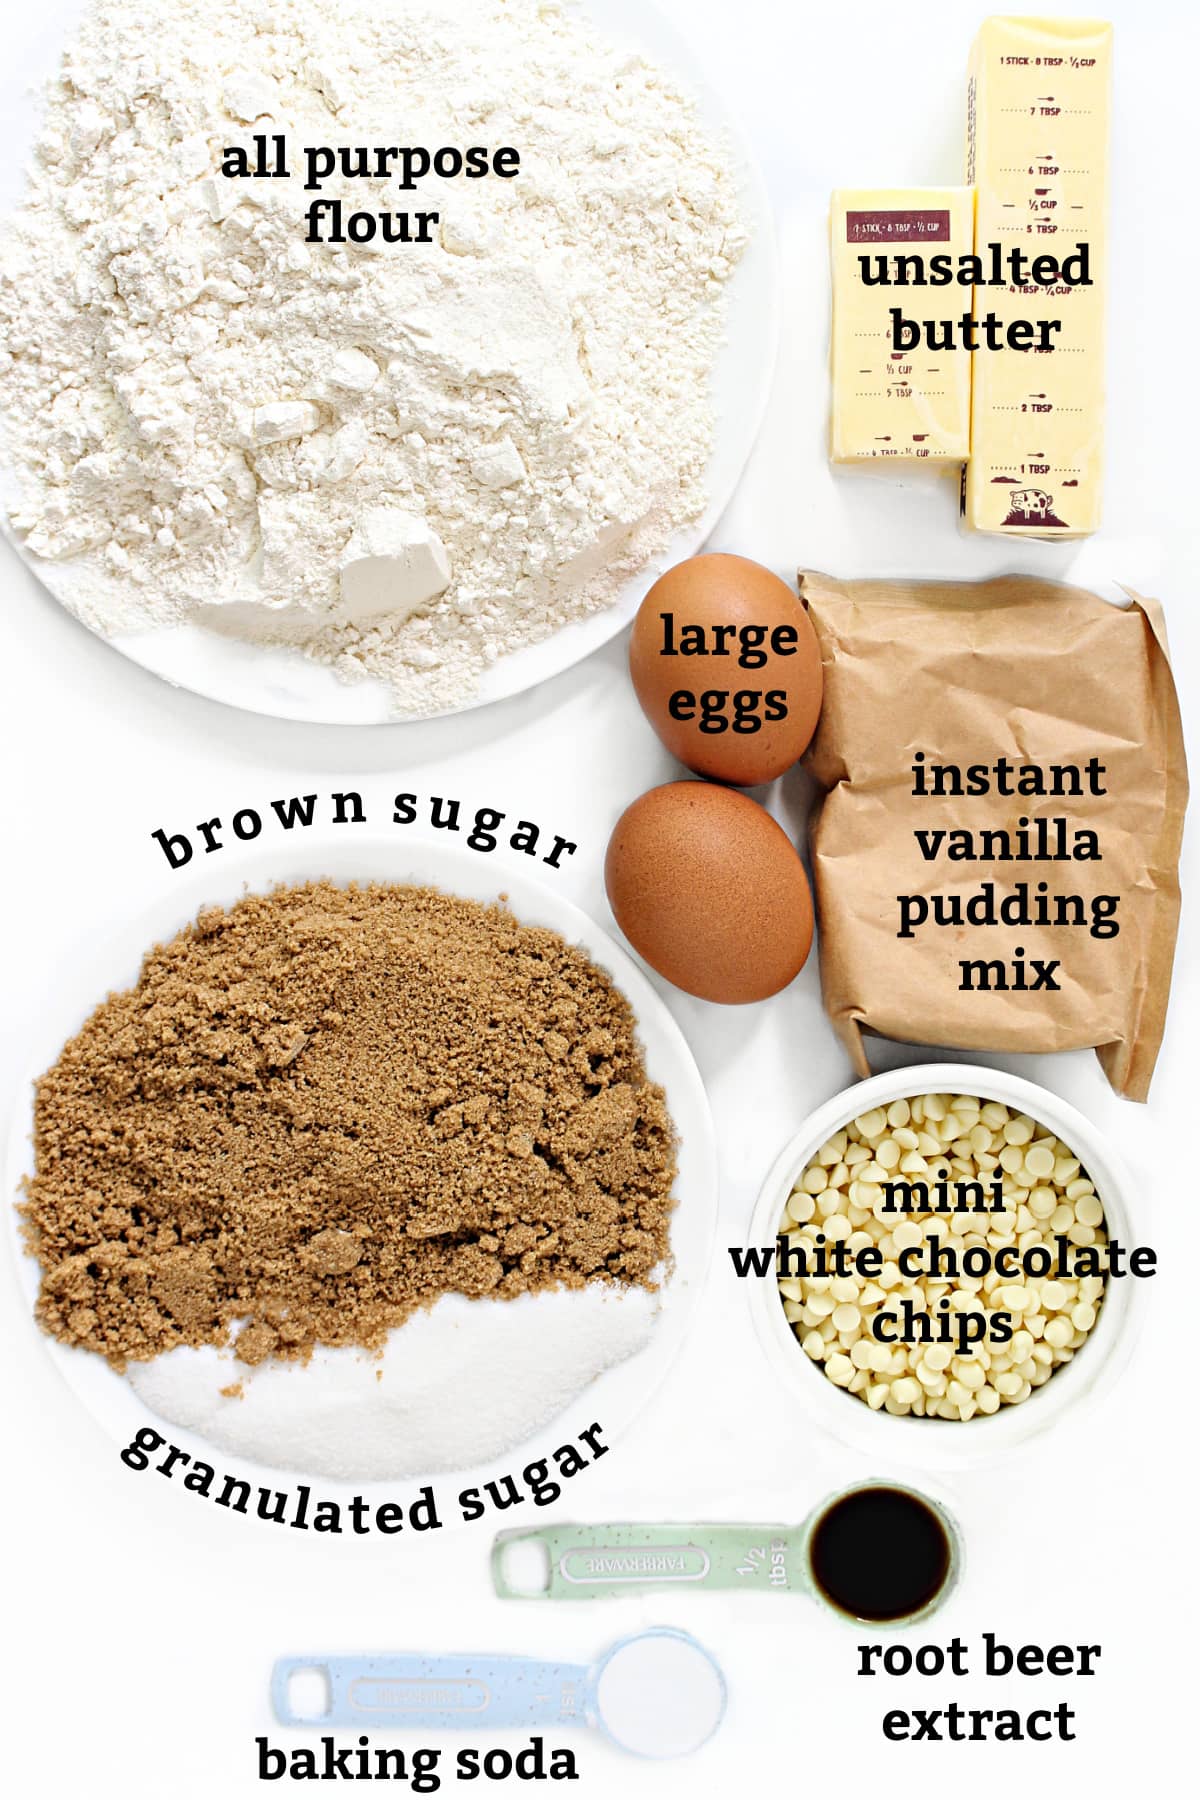 Ingredients: flour, butter, eggs, vanilla pudding, brown/white sugar, white chocolate chips, rootbeer extract, baking soda.